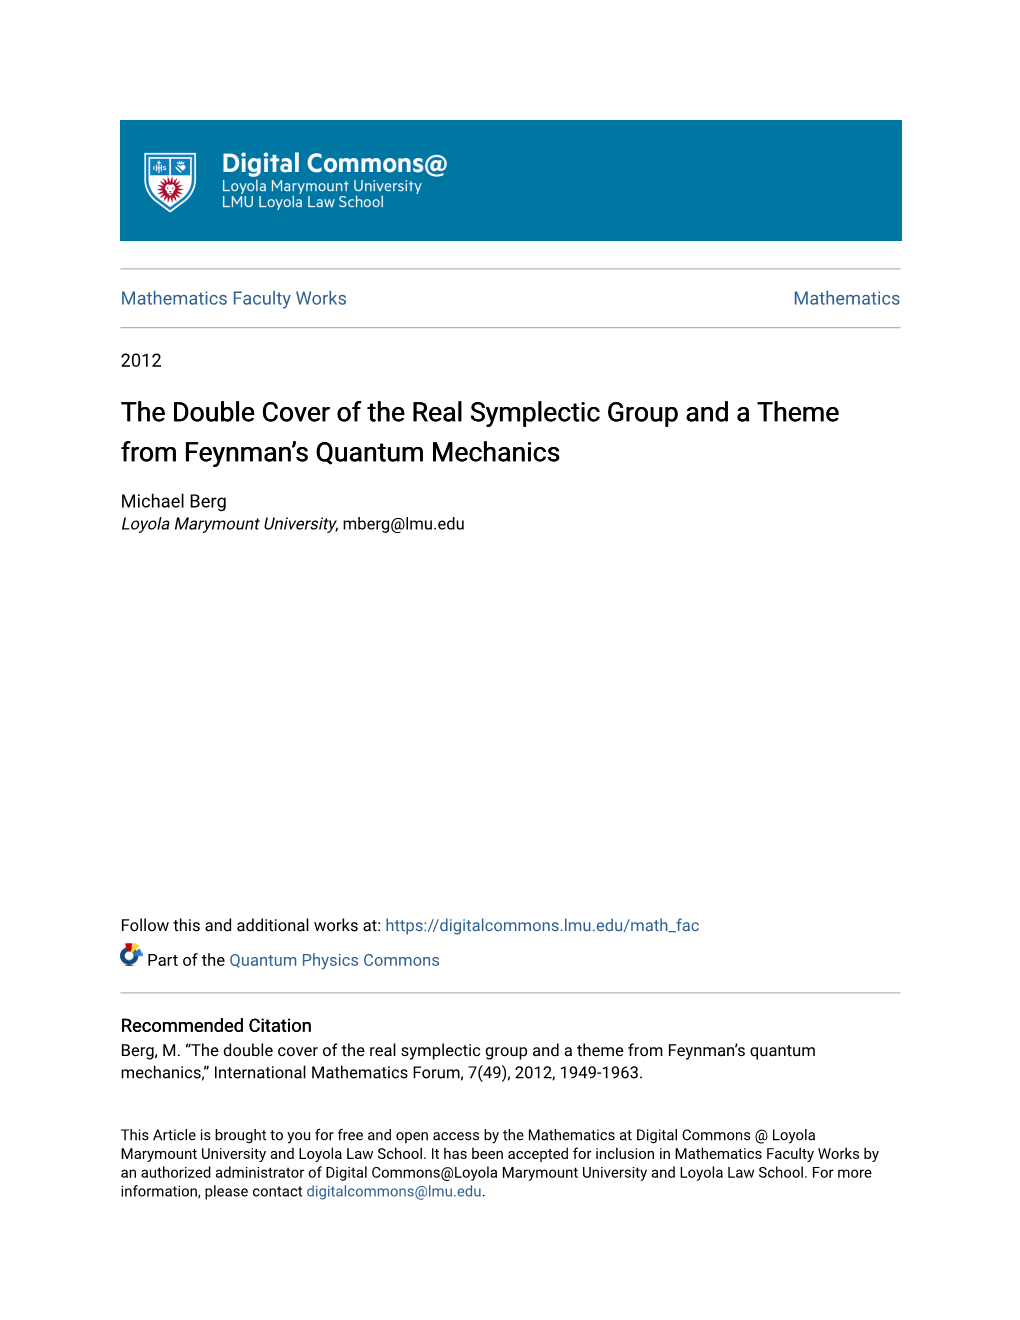 The Double Cover of the Real Symplectic Group and a Theme from Feynman’S Quantum Mechanics